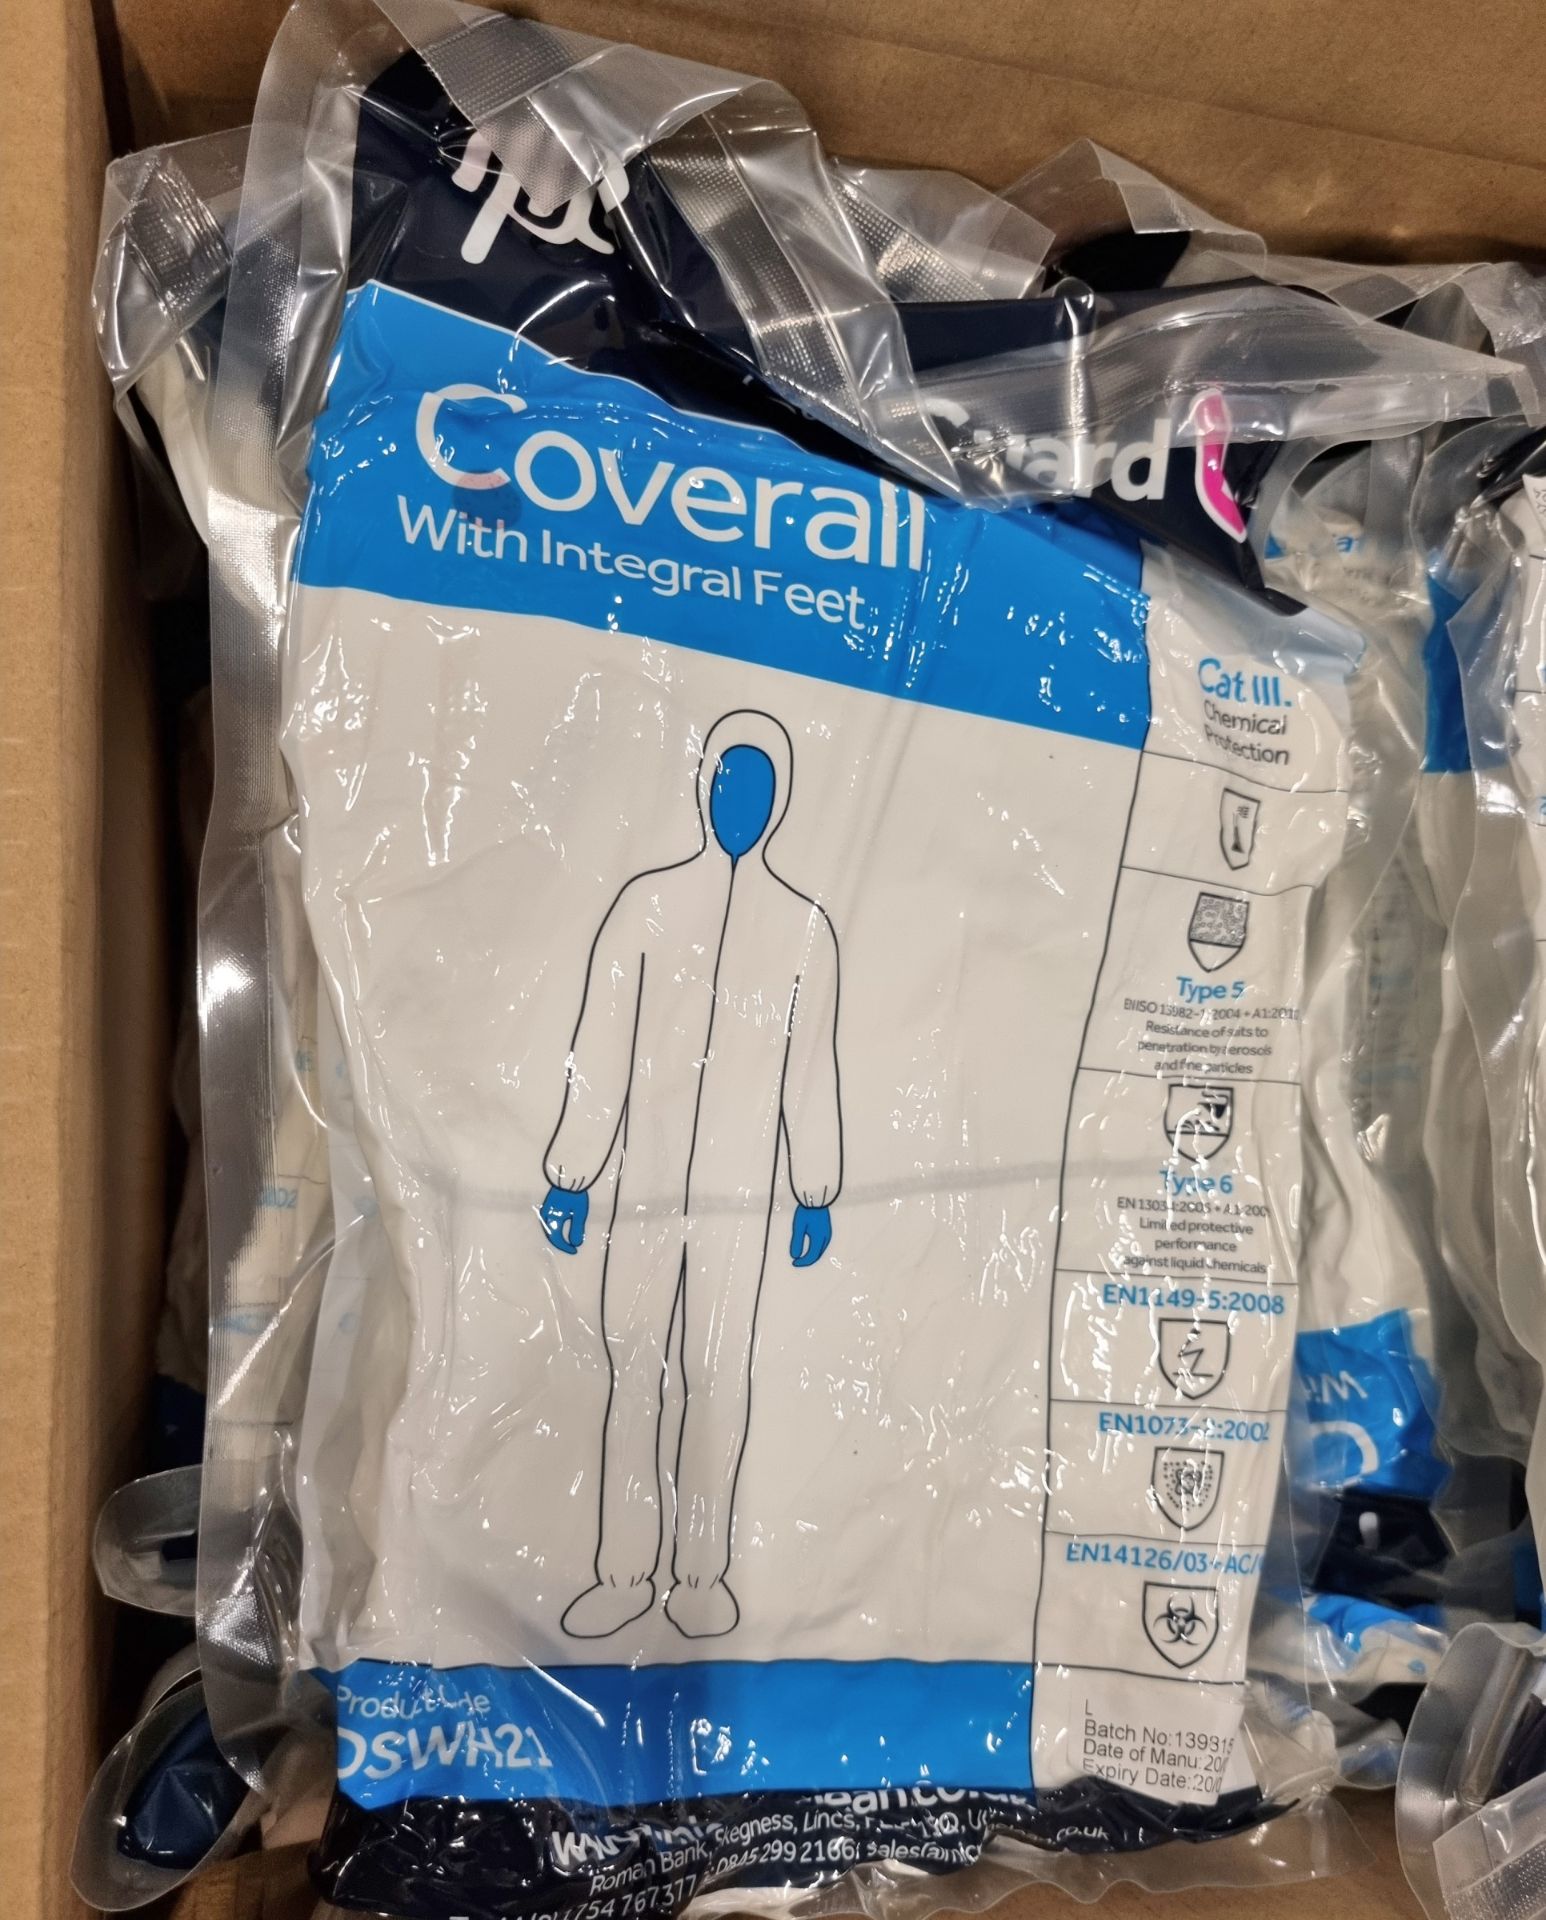 20x boxes of SureGuard3 DSWH21LRG large coverall with integral feet - 25 units per box - Image 2 of 5